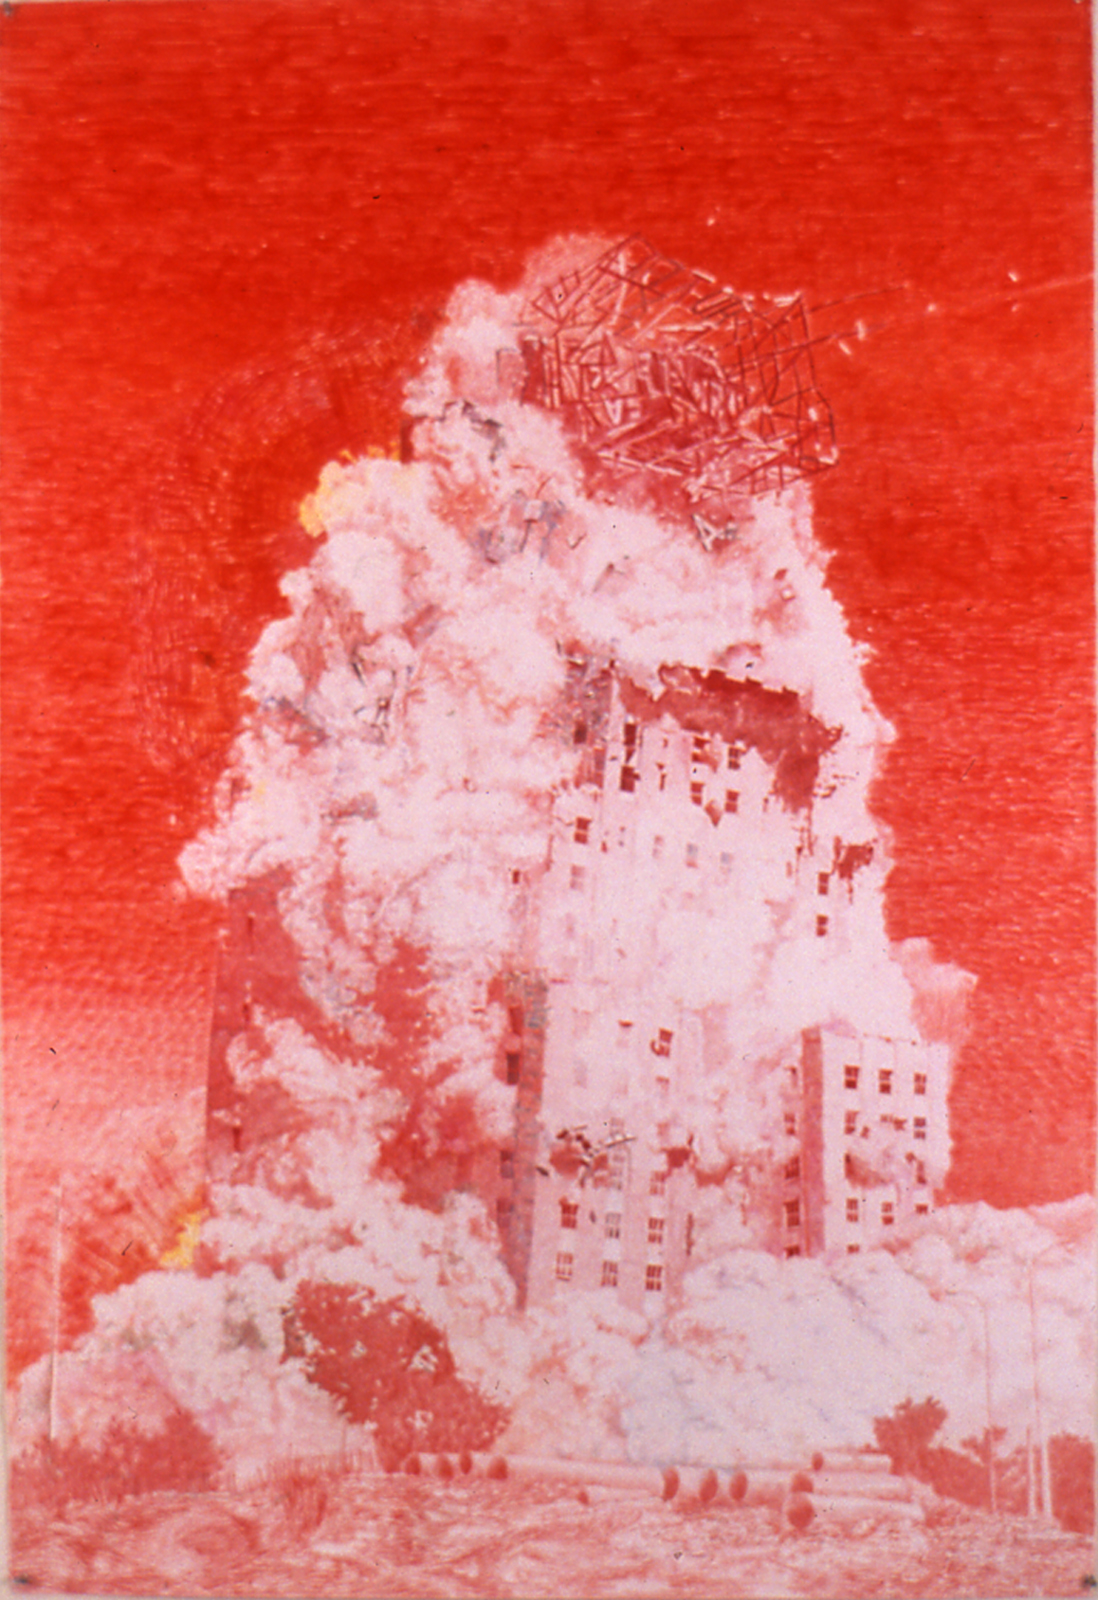 Red Demo, 2000, Colored pencil on paper, 60 x 41 inches, Private Collection